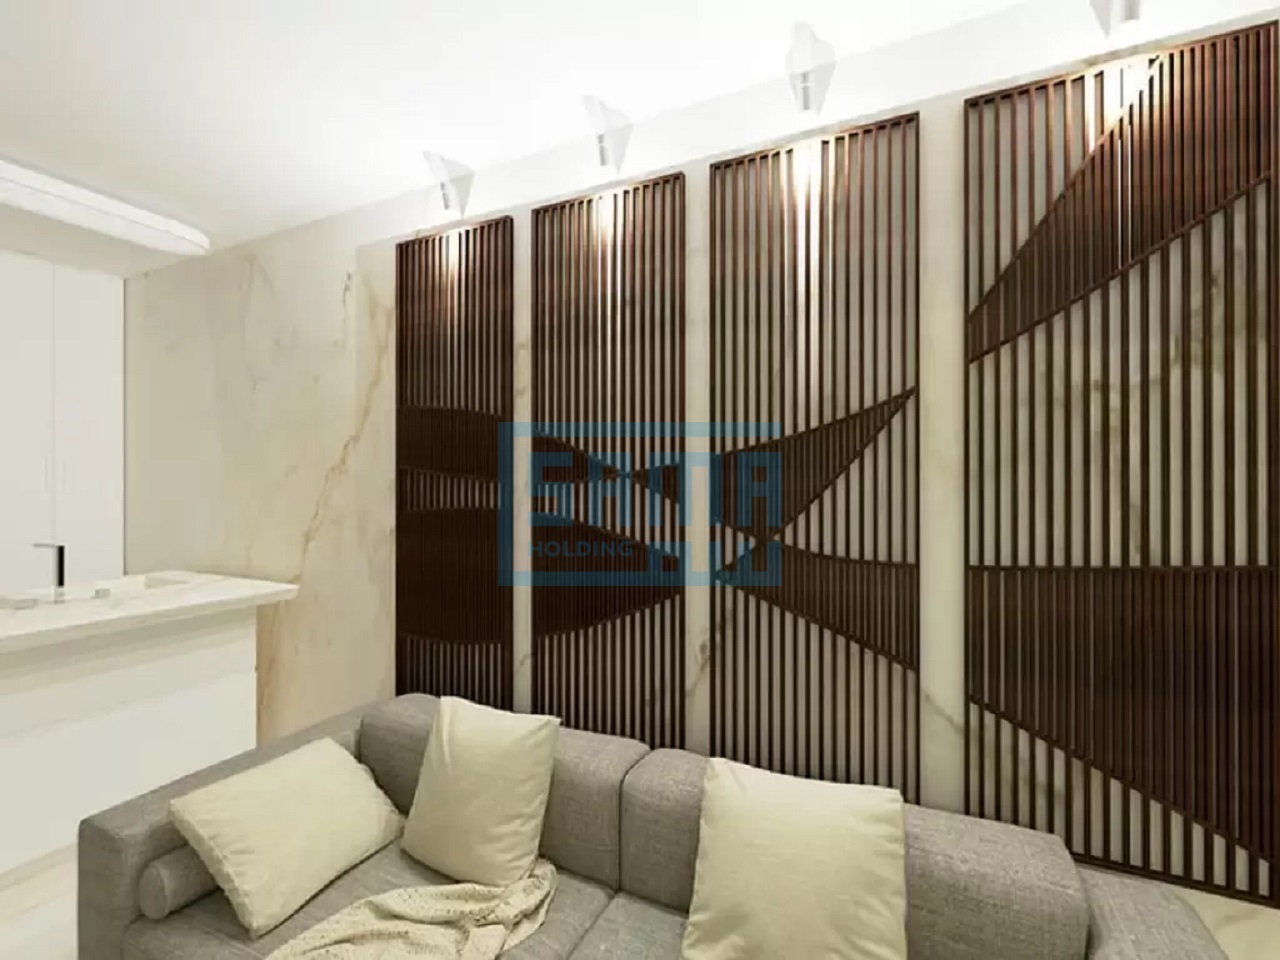 2 Bedrooms Apartment for Sale in Abu Dhabi in Al Raha Beach